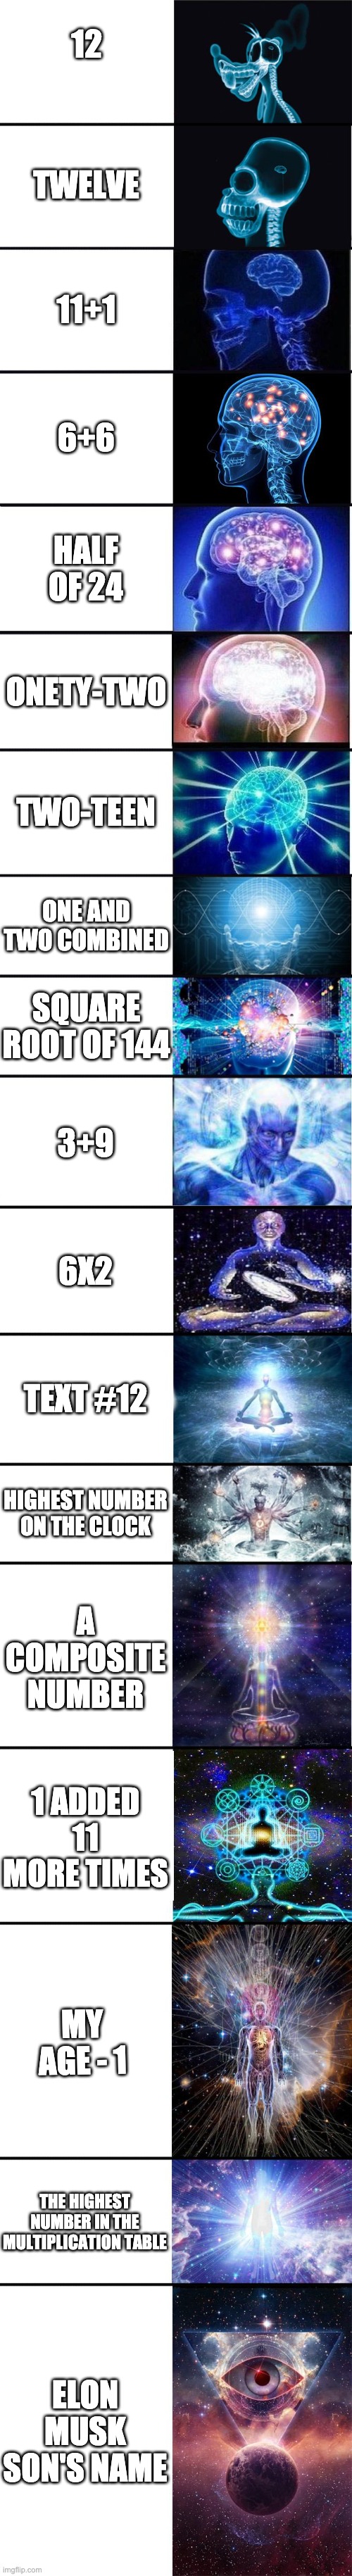 expanding brain: 9001 | 12; TWELVE; 11+1; 6+6; HALF OF 24; ONETY-TWO; TWO-TEEN; ONE AND TWO COMBINED; SQUARE ROOT OF 144; 3+9; 6X2; TEXT #12; HIGHEST NUMBER ON THE CLOCK; A COMPOSITE NUMBER; 1 ADDED 11 MORE TIMES; MY AGE - 1; THE HIGHEST NUMBER IN THE MULTIPLICATION TABLE; ELON MUSK SON'S NAME | image tagged in expanding brain 9001 | made w/ Imgflip meme maker